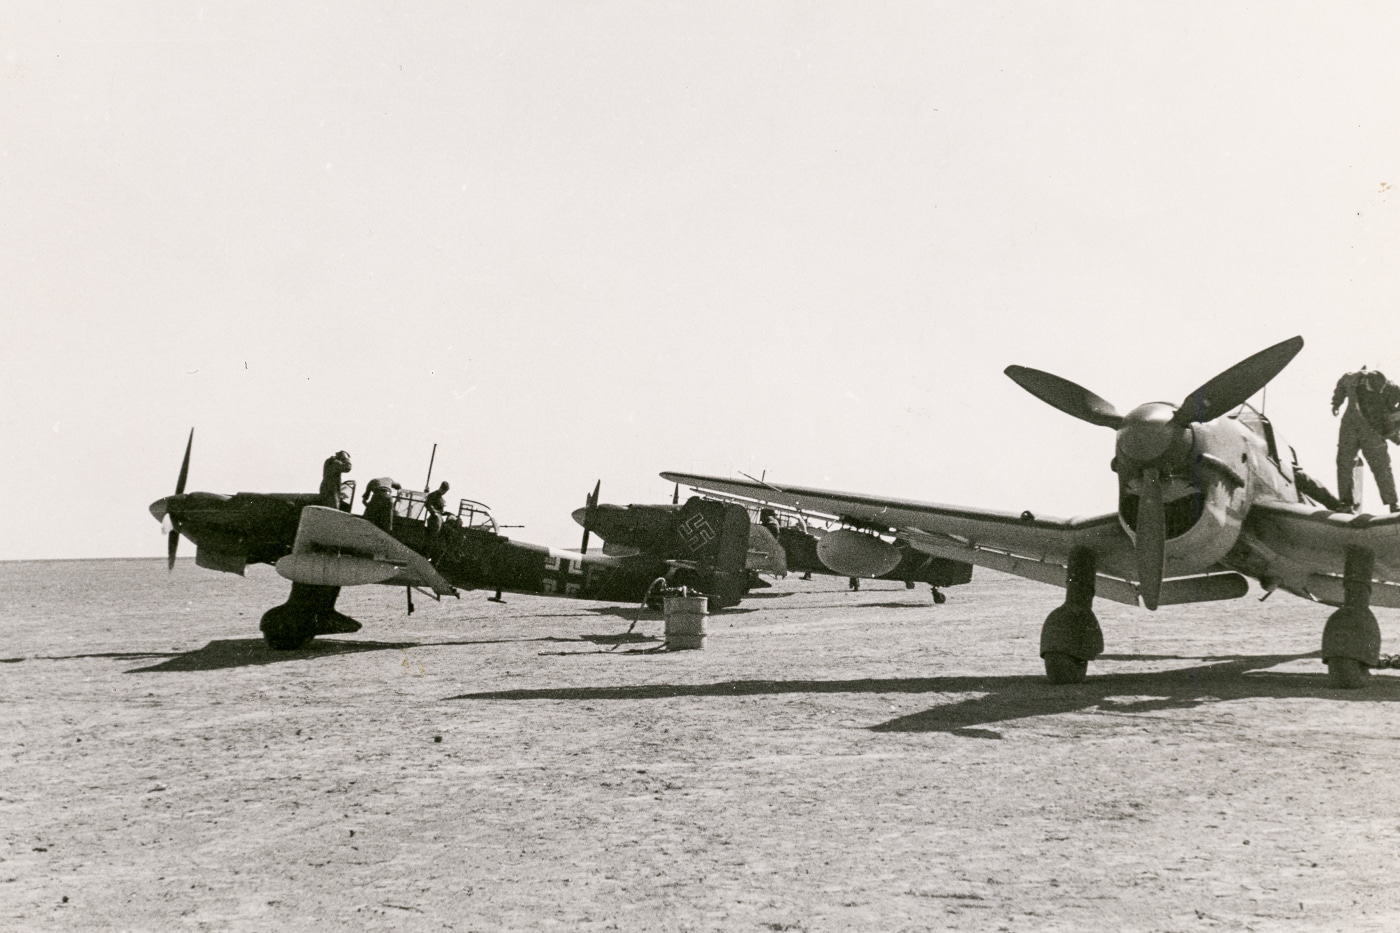 In this digital image, we see several Stukas on the flight line that are being prepared for combat in France. You can see the rear gunner entering the cockpit of one aircraft. His mission was to keep the RAF pilots off of the plane when the Messerschmitt Bf 109 fighters were unavailable. When running a dive-bomb mission, the planes were particularly vulnerable to hits on the fuselage — a point made by Von Richthofen during pre-war strategy sessions.